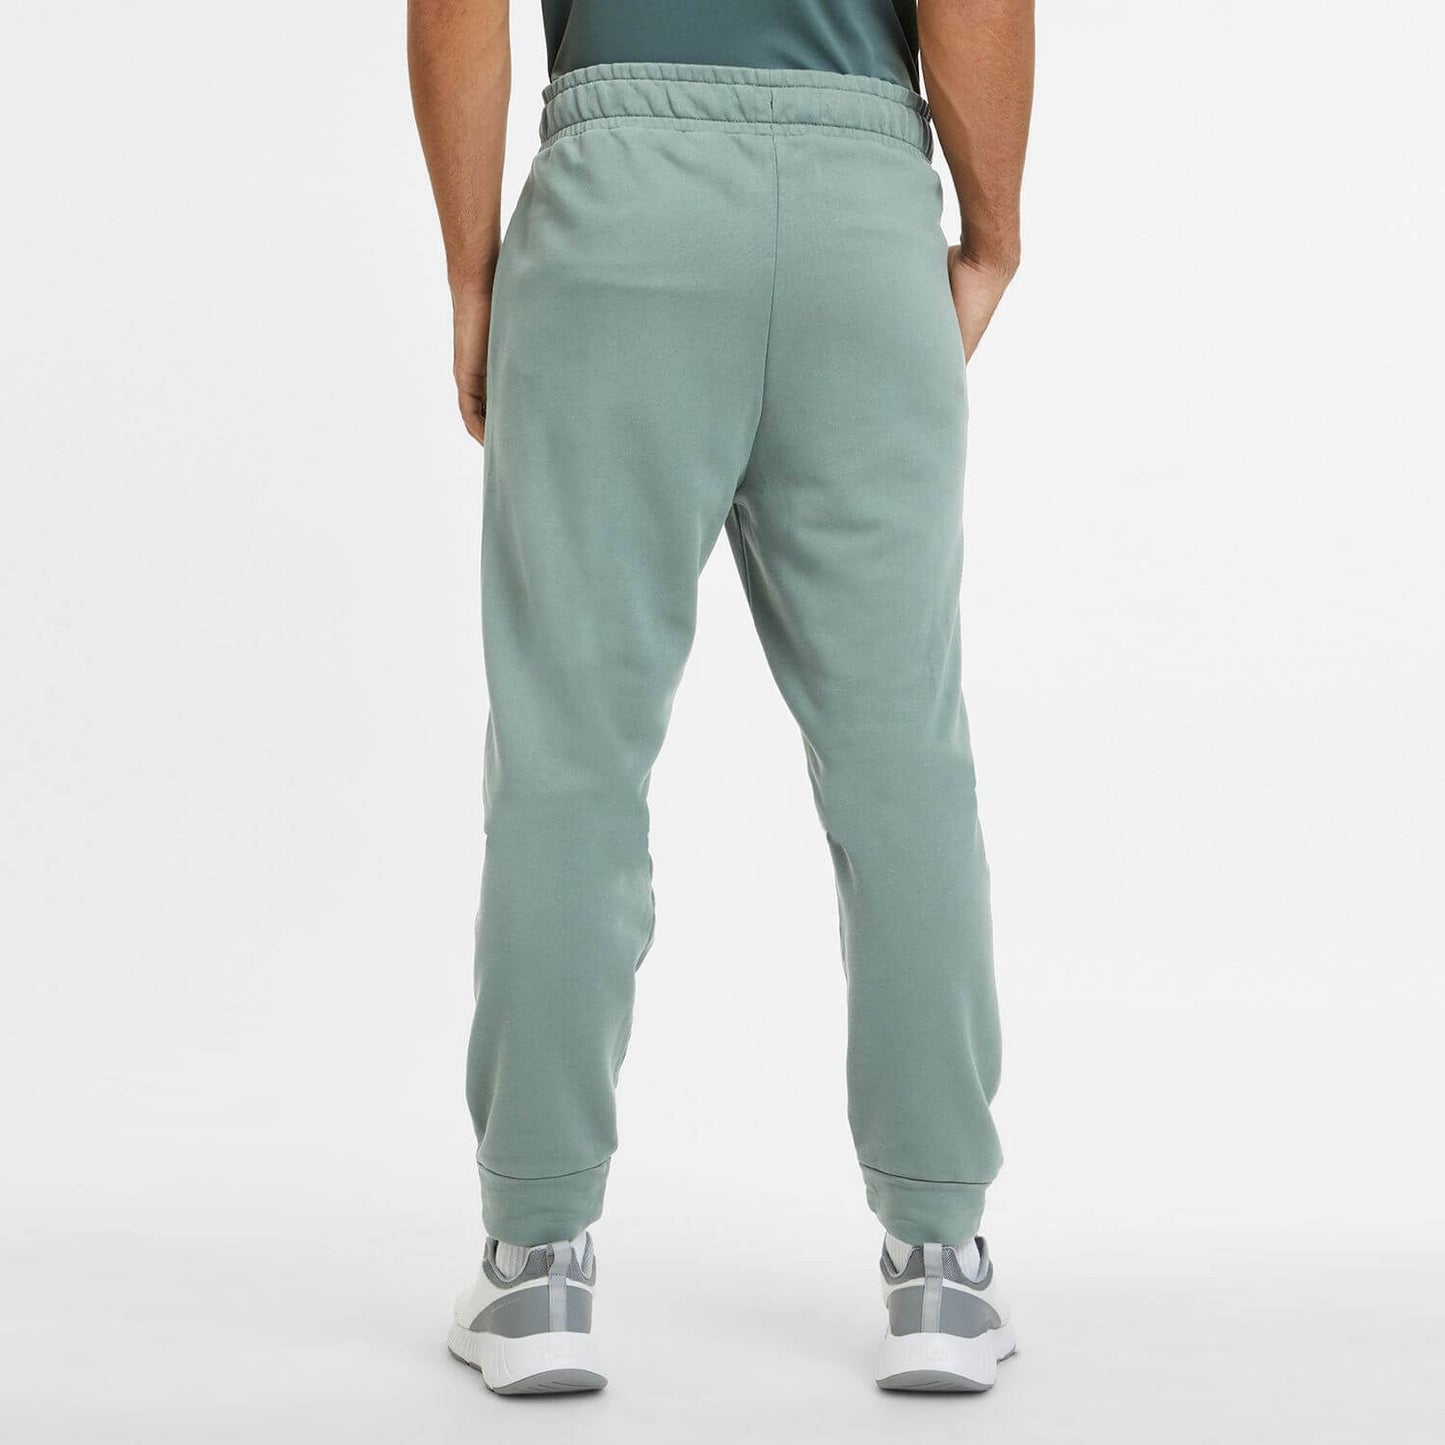 FILA CROLLES dropped crotch pants Dark Forest